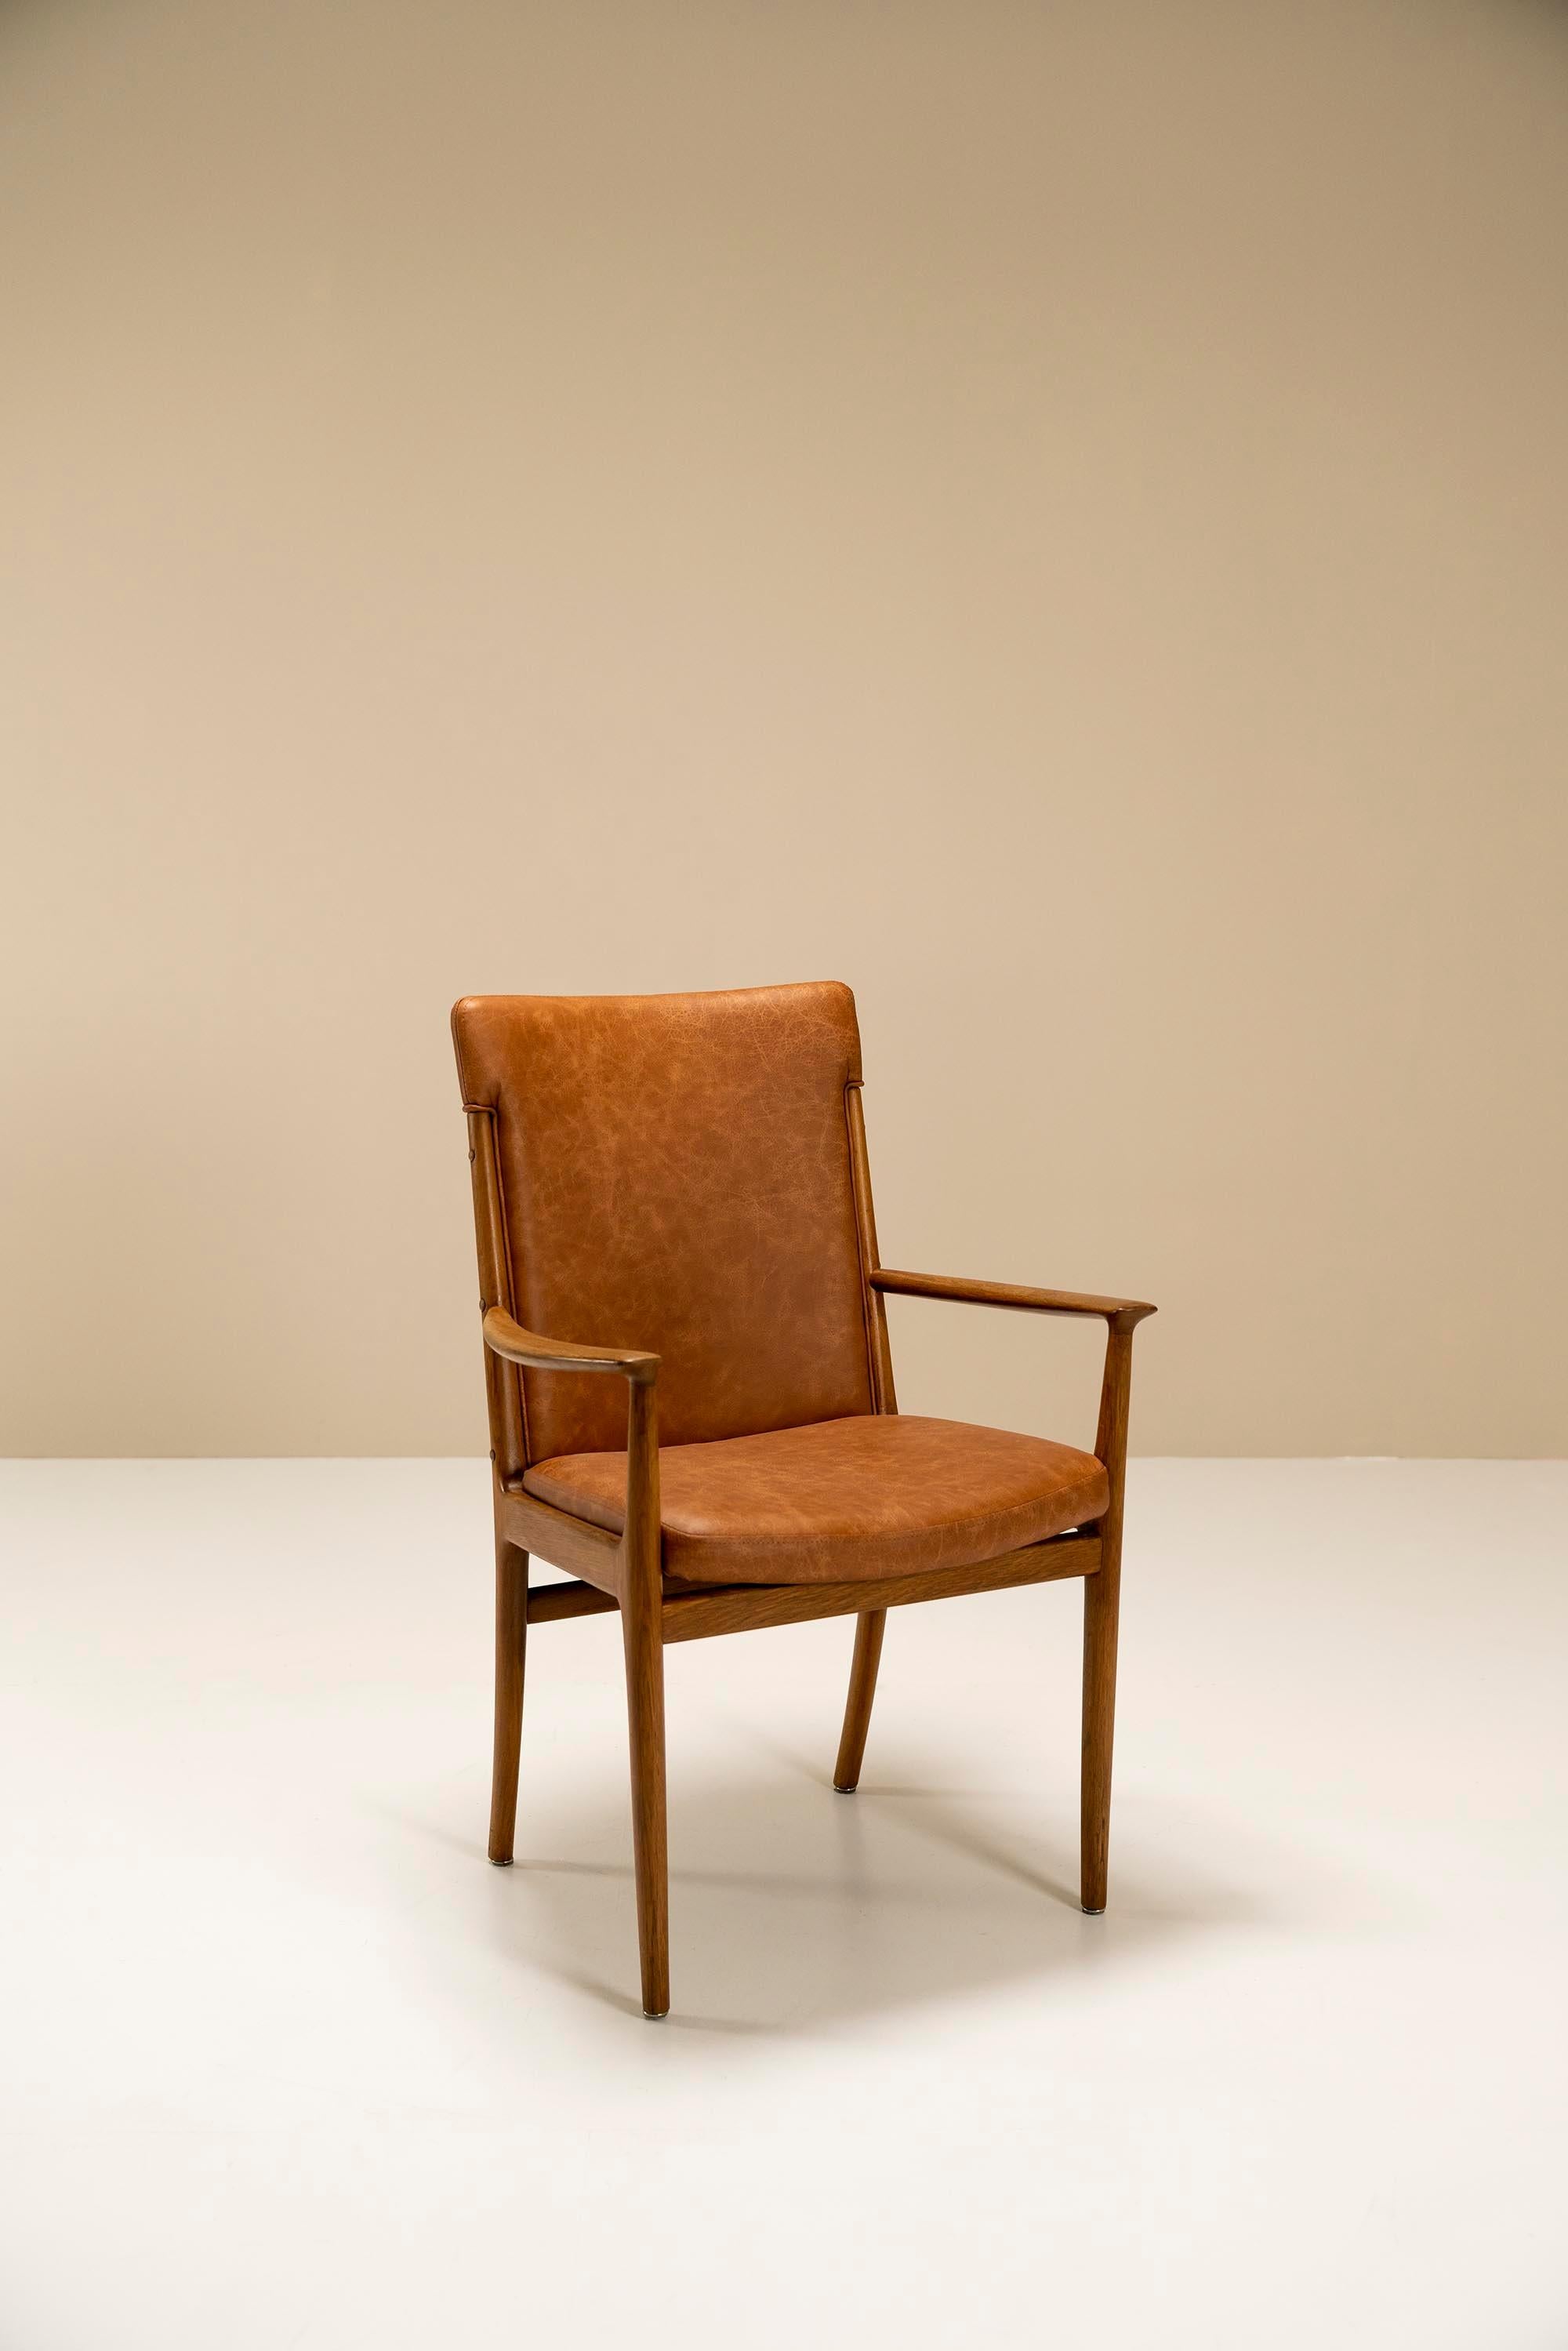 Four Armchairs in Ash Wood and Leather by Kai Lyngfeldt Larsen, Denmark, 1960s For Sale 3